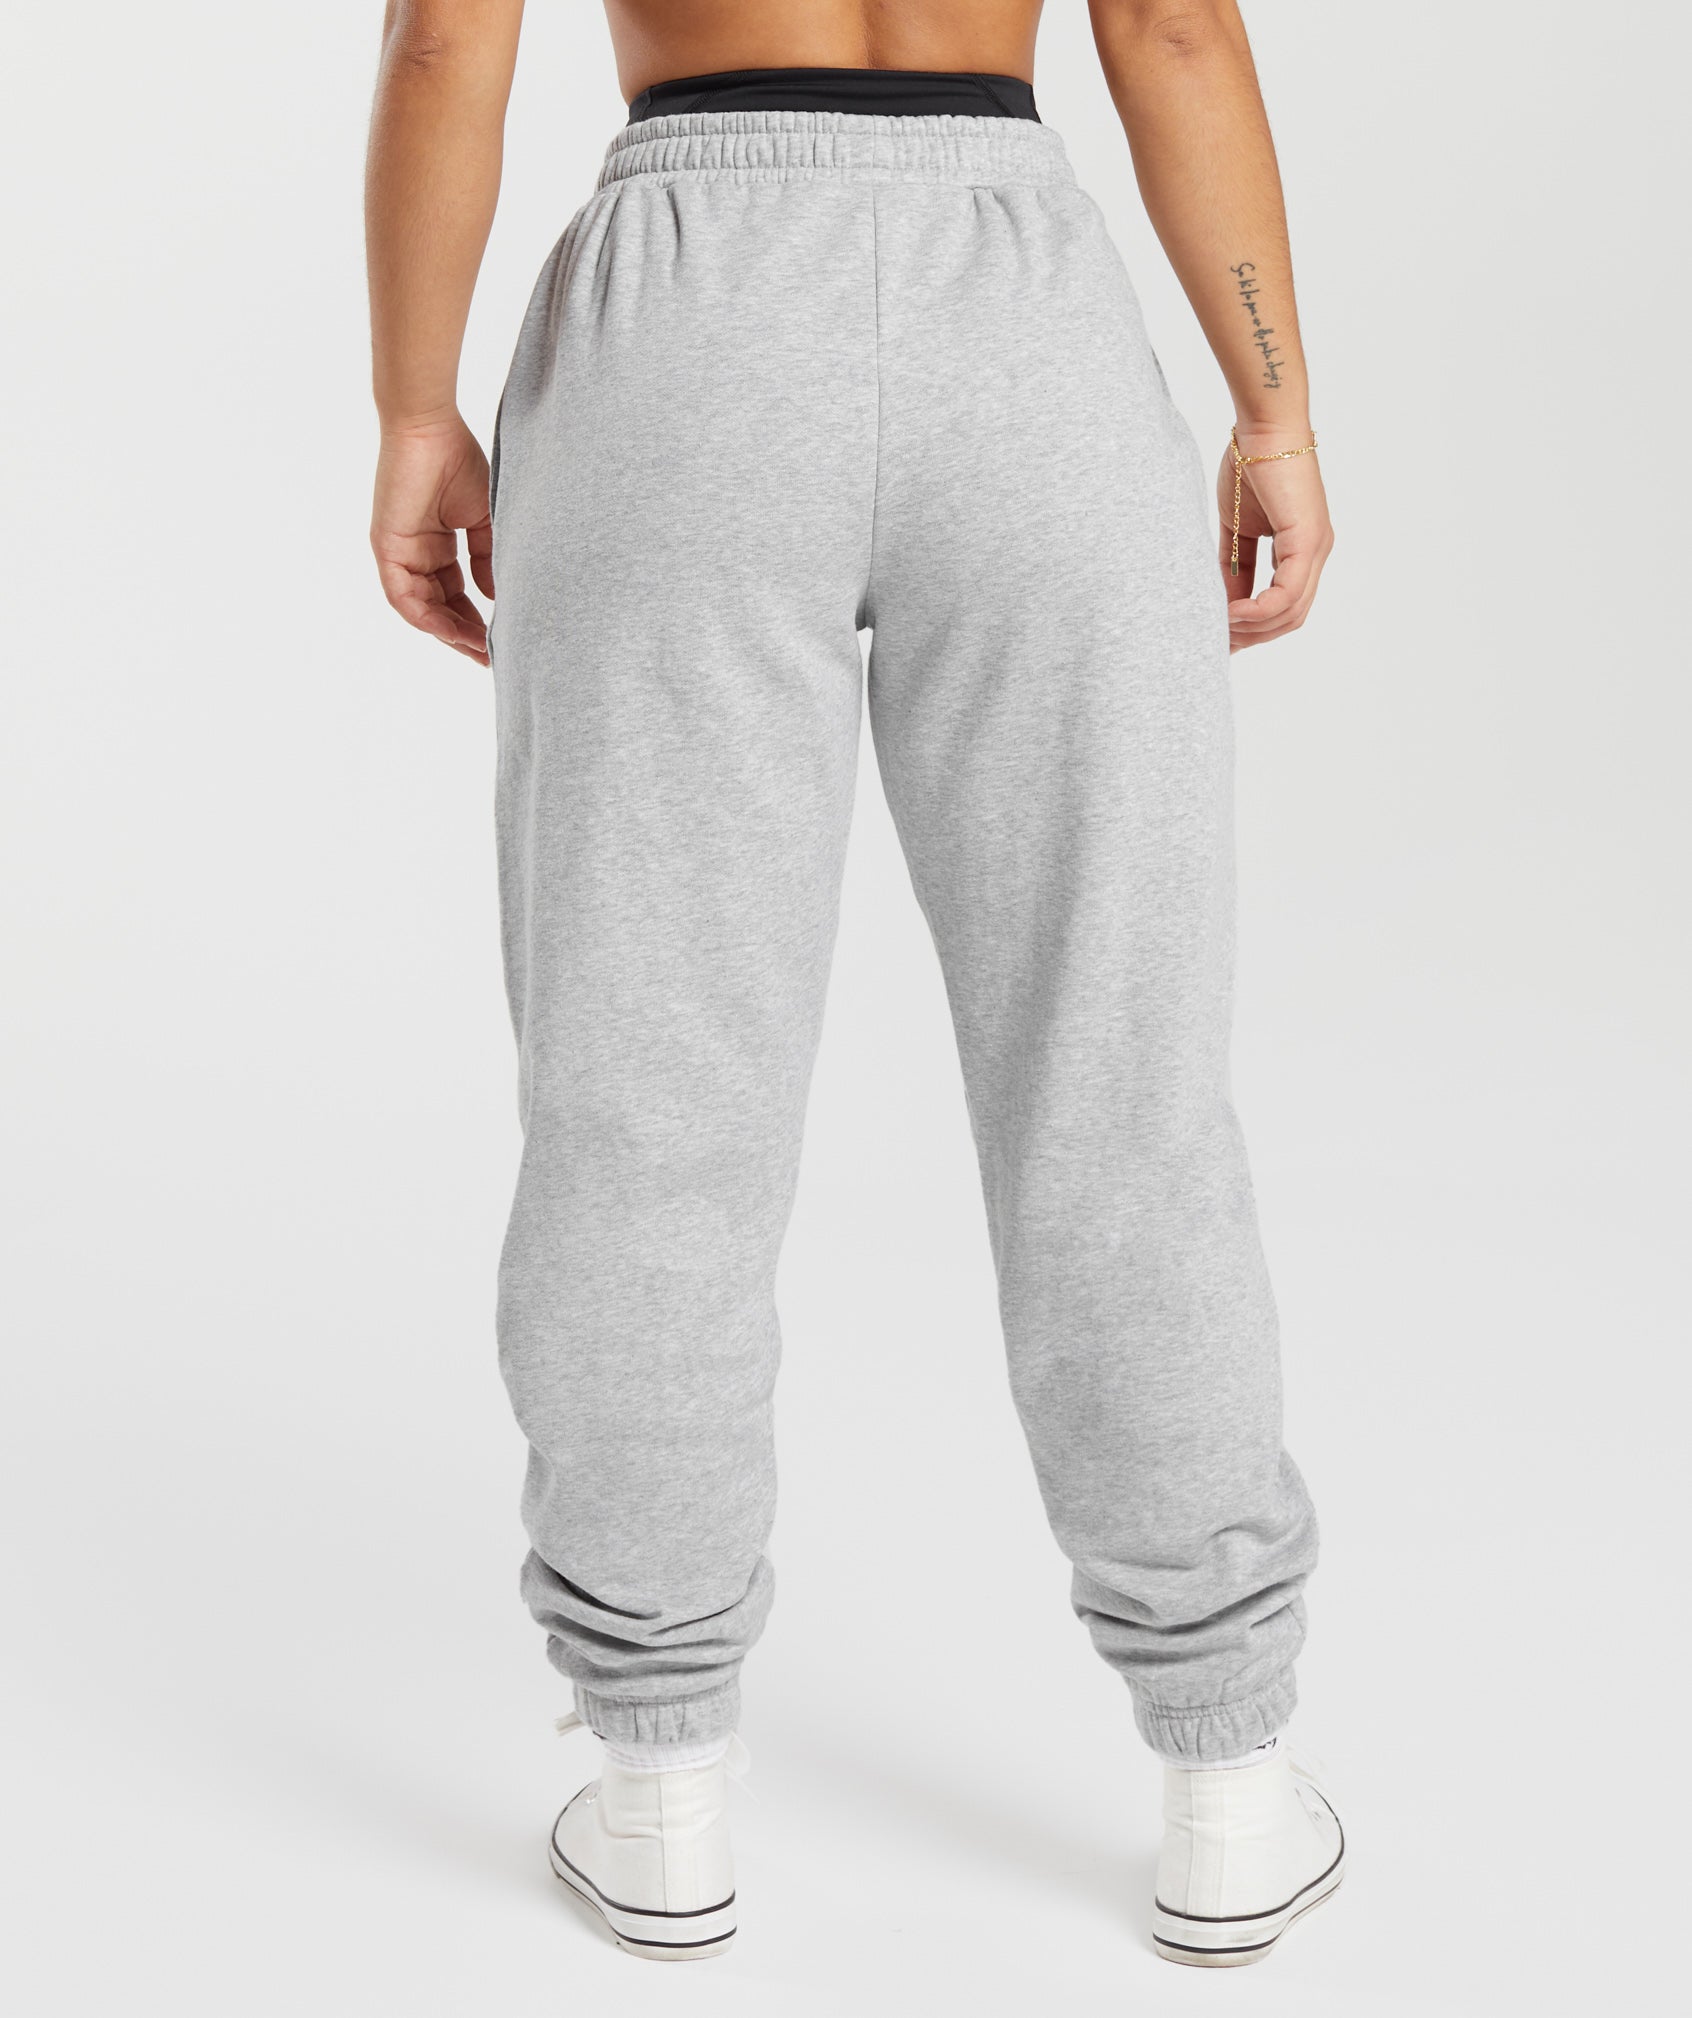 Lifting Essentials Graphic Joggers in Light Grey Core Marl - view 2